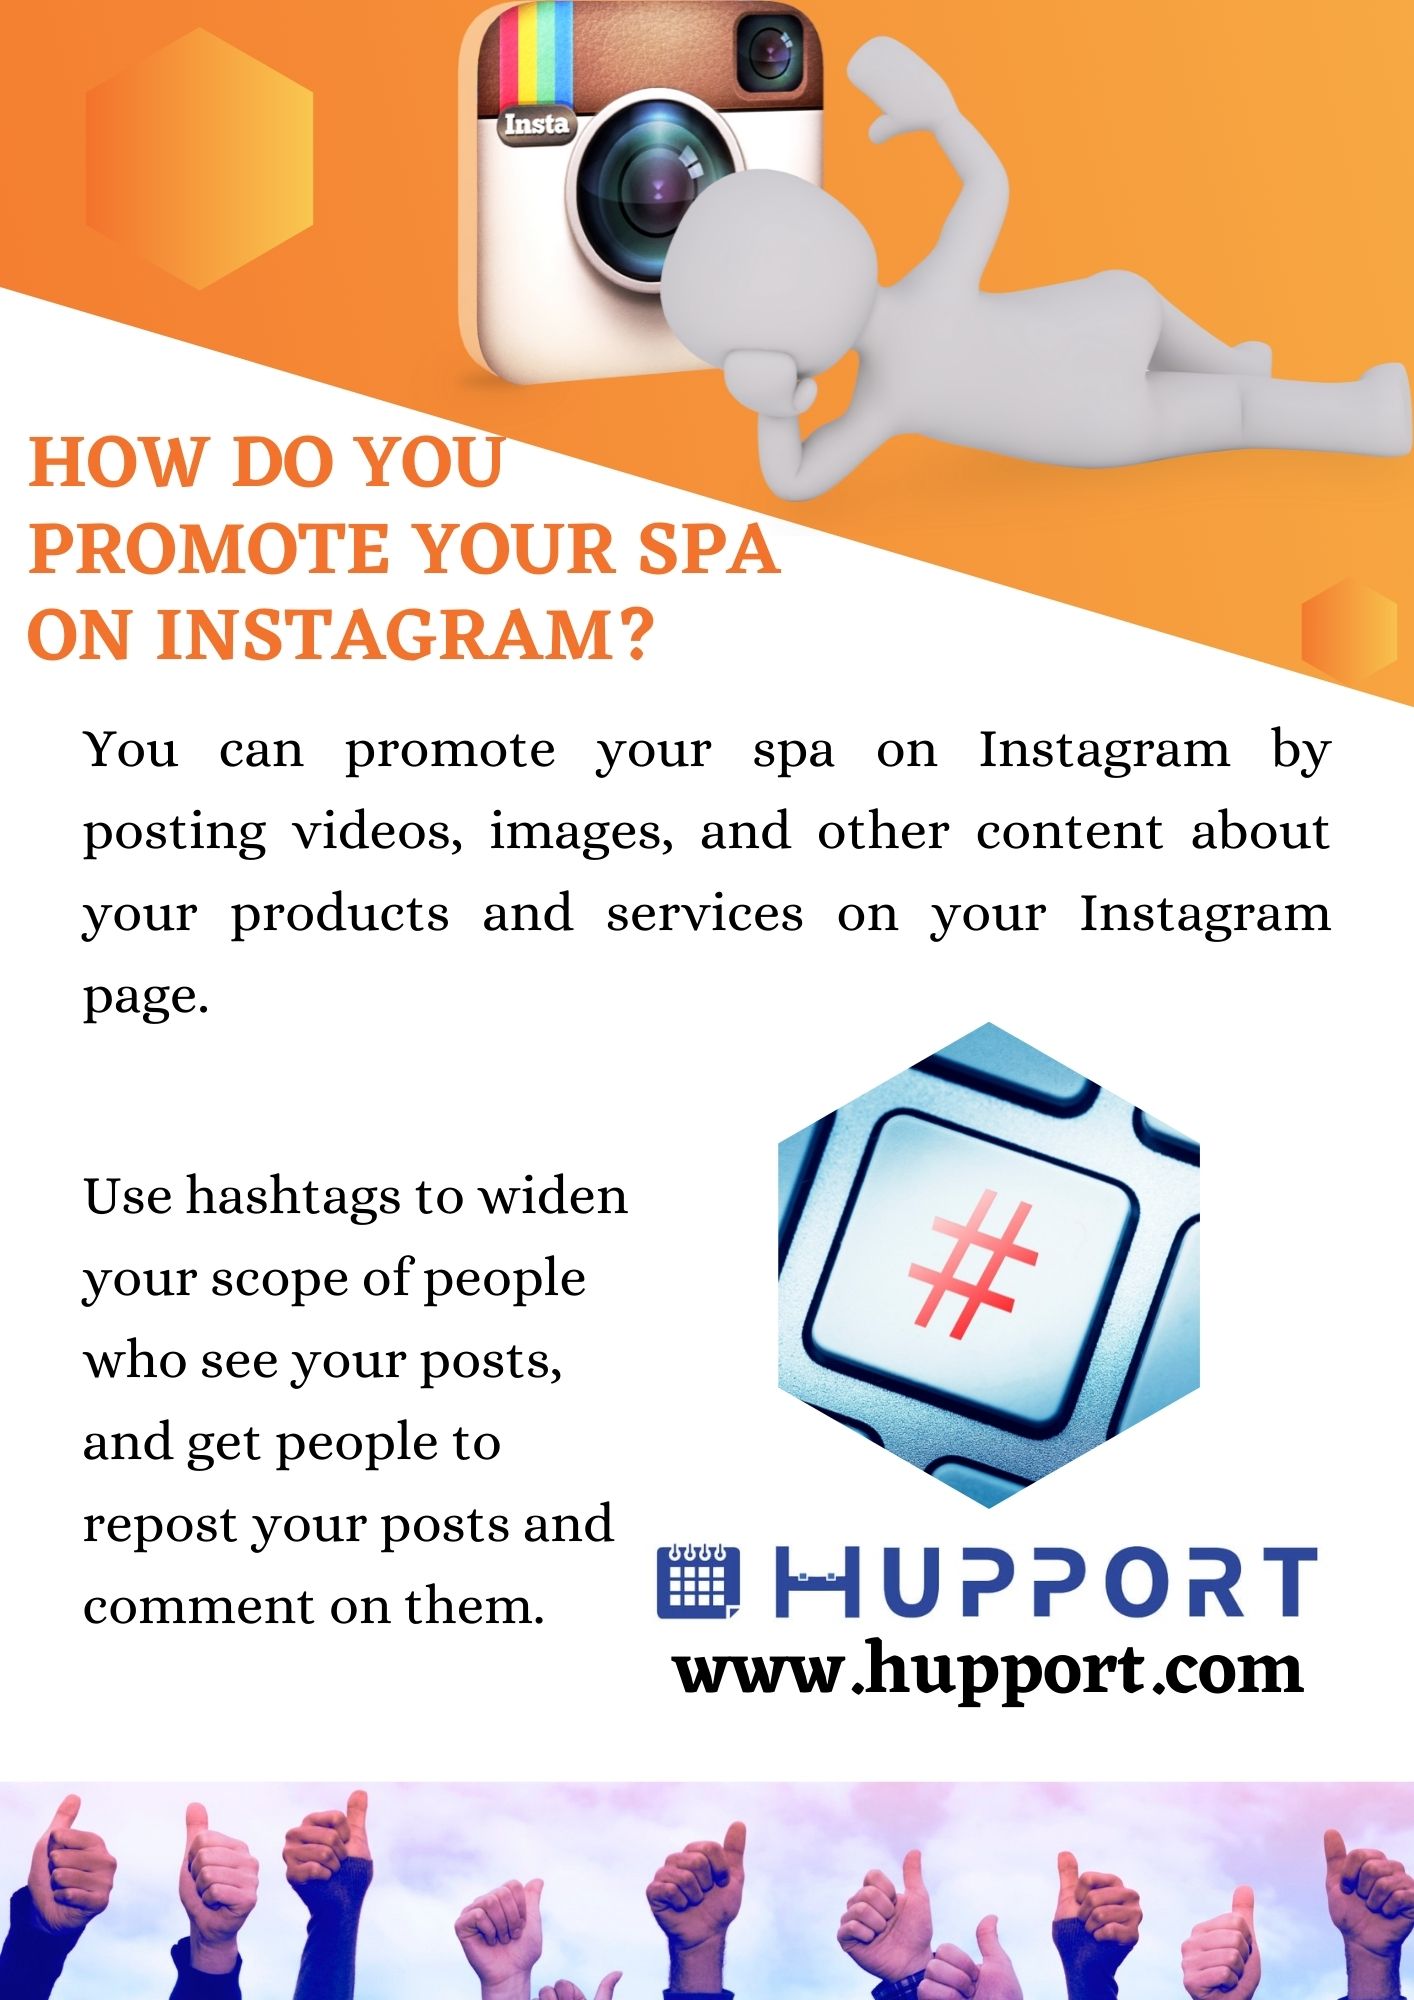 How do you promote your spa on Instagram?